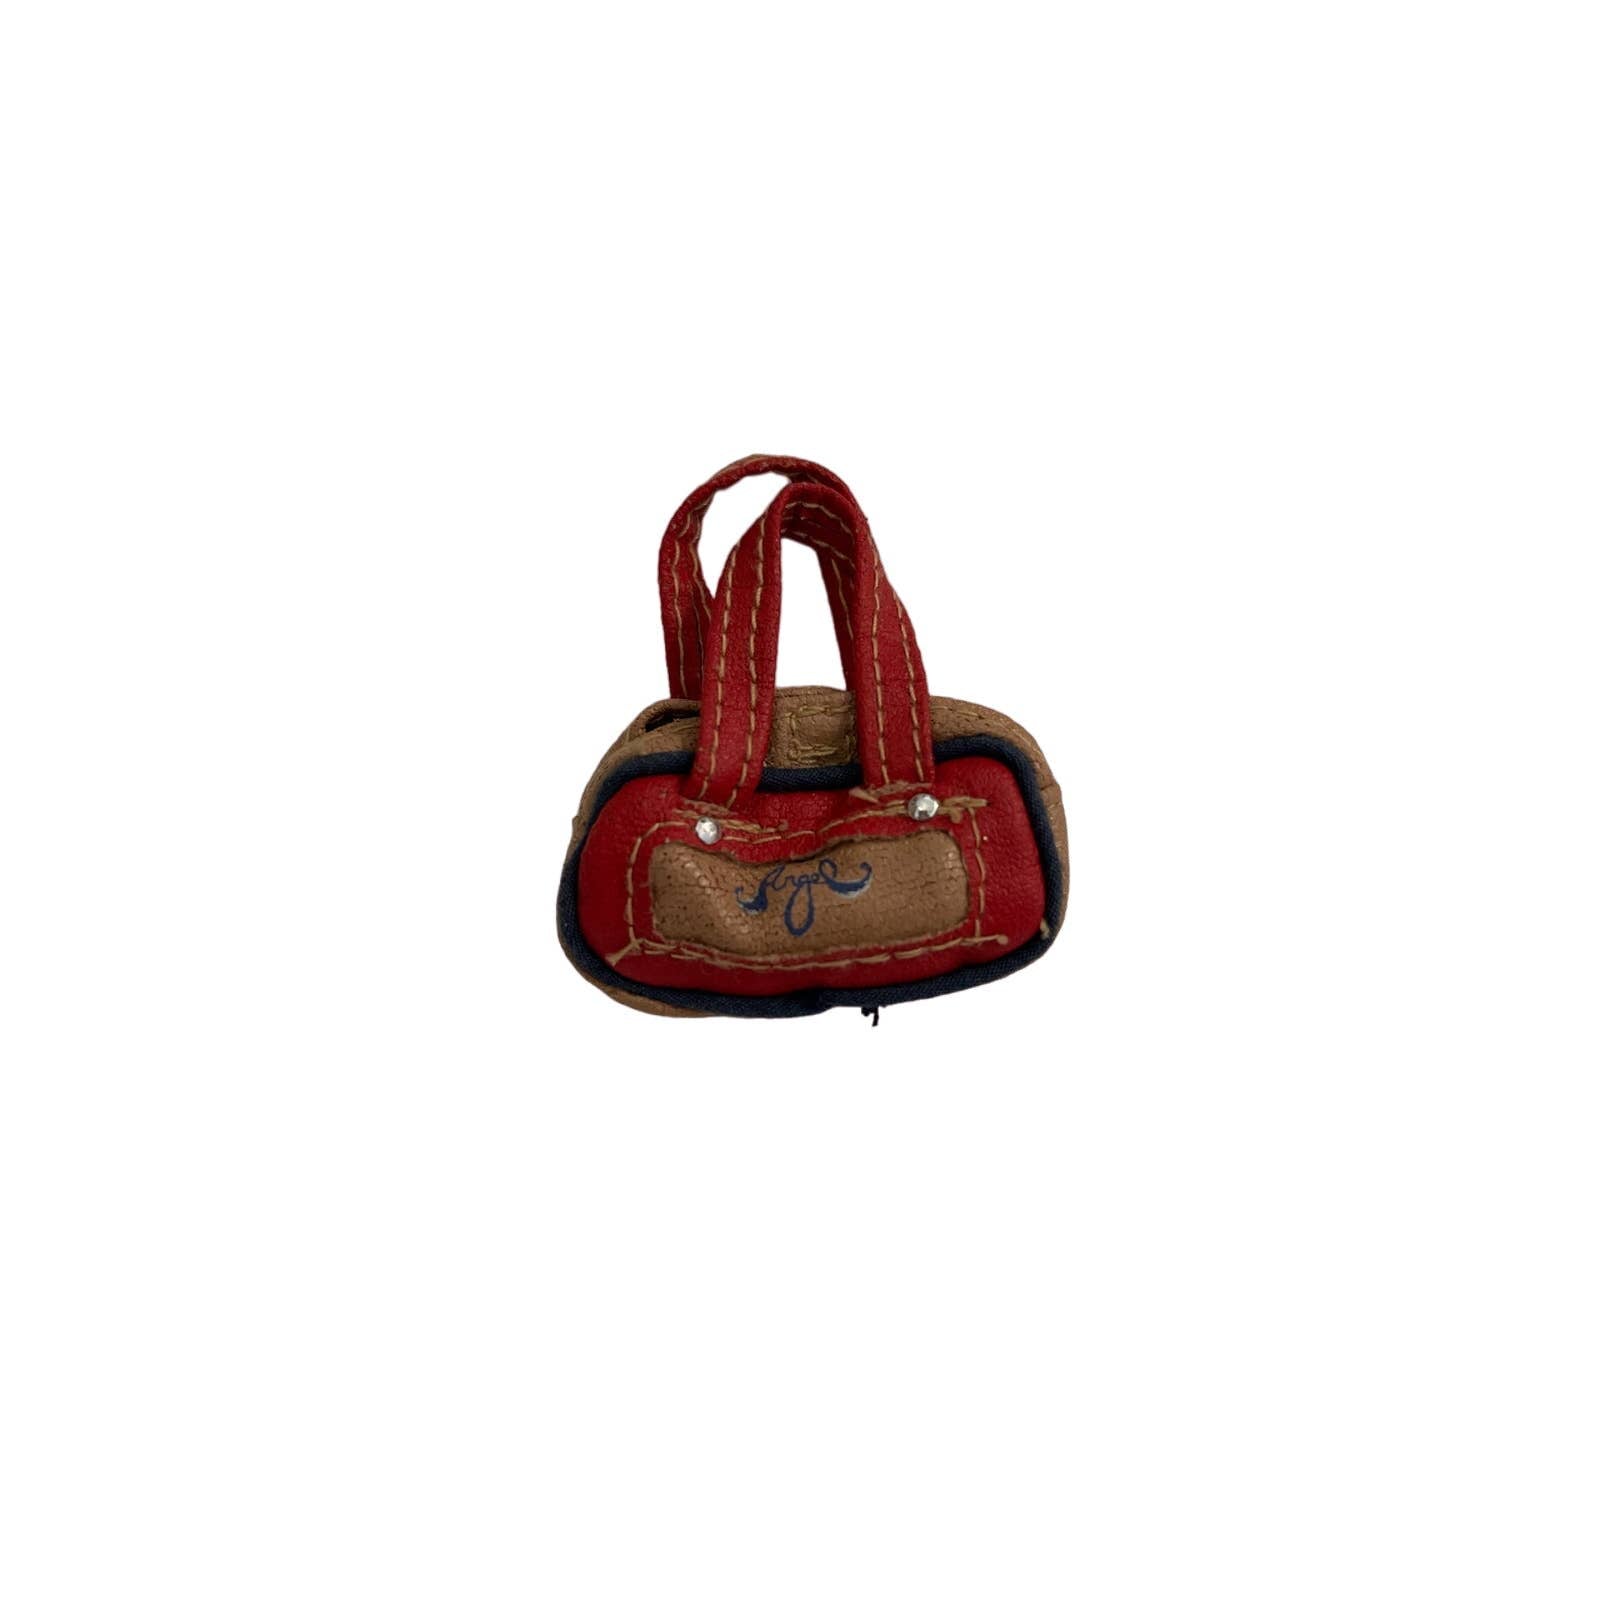 Chewy V Red Bag Luxury Dog Toy Purse